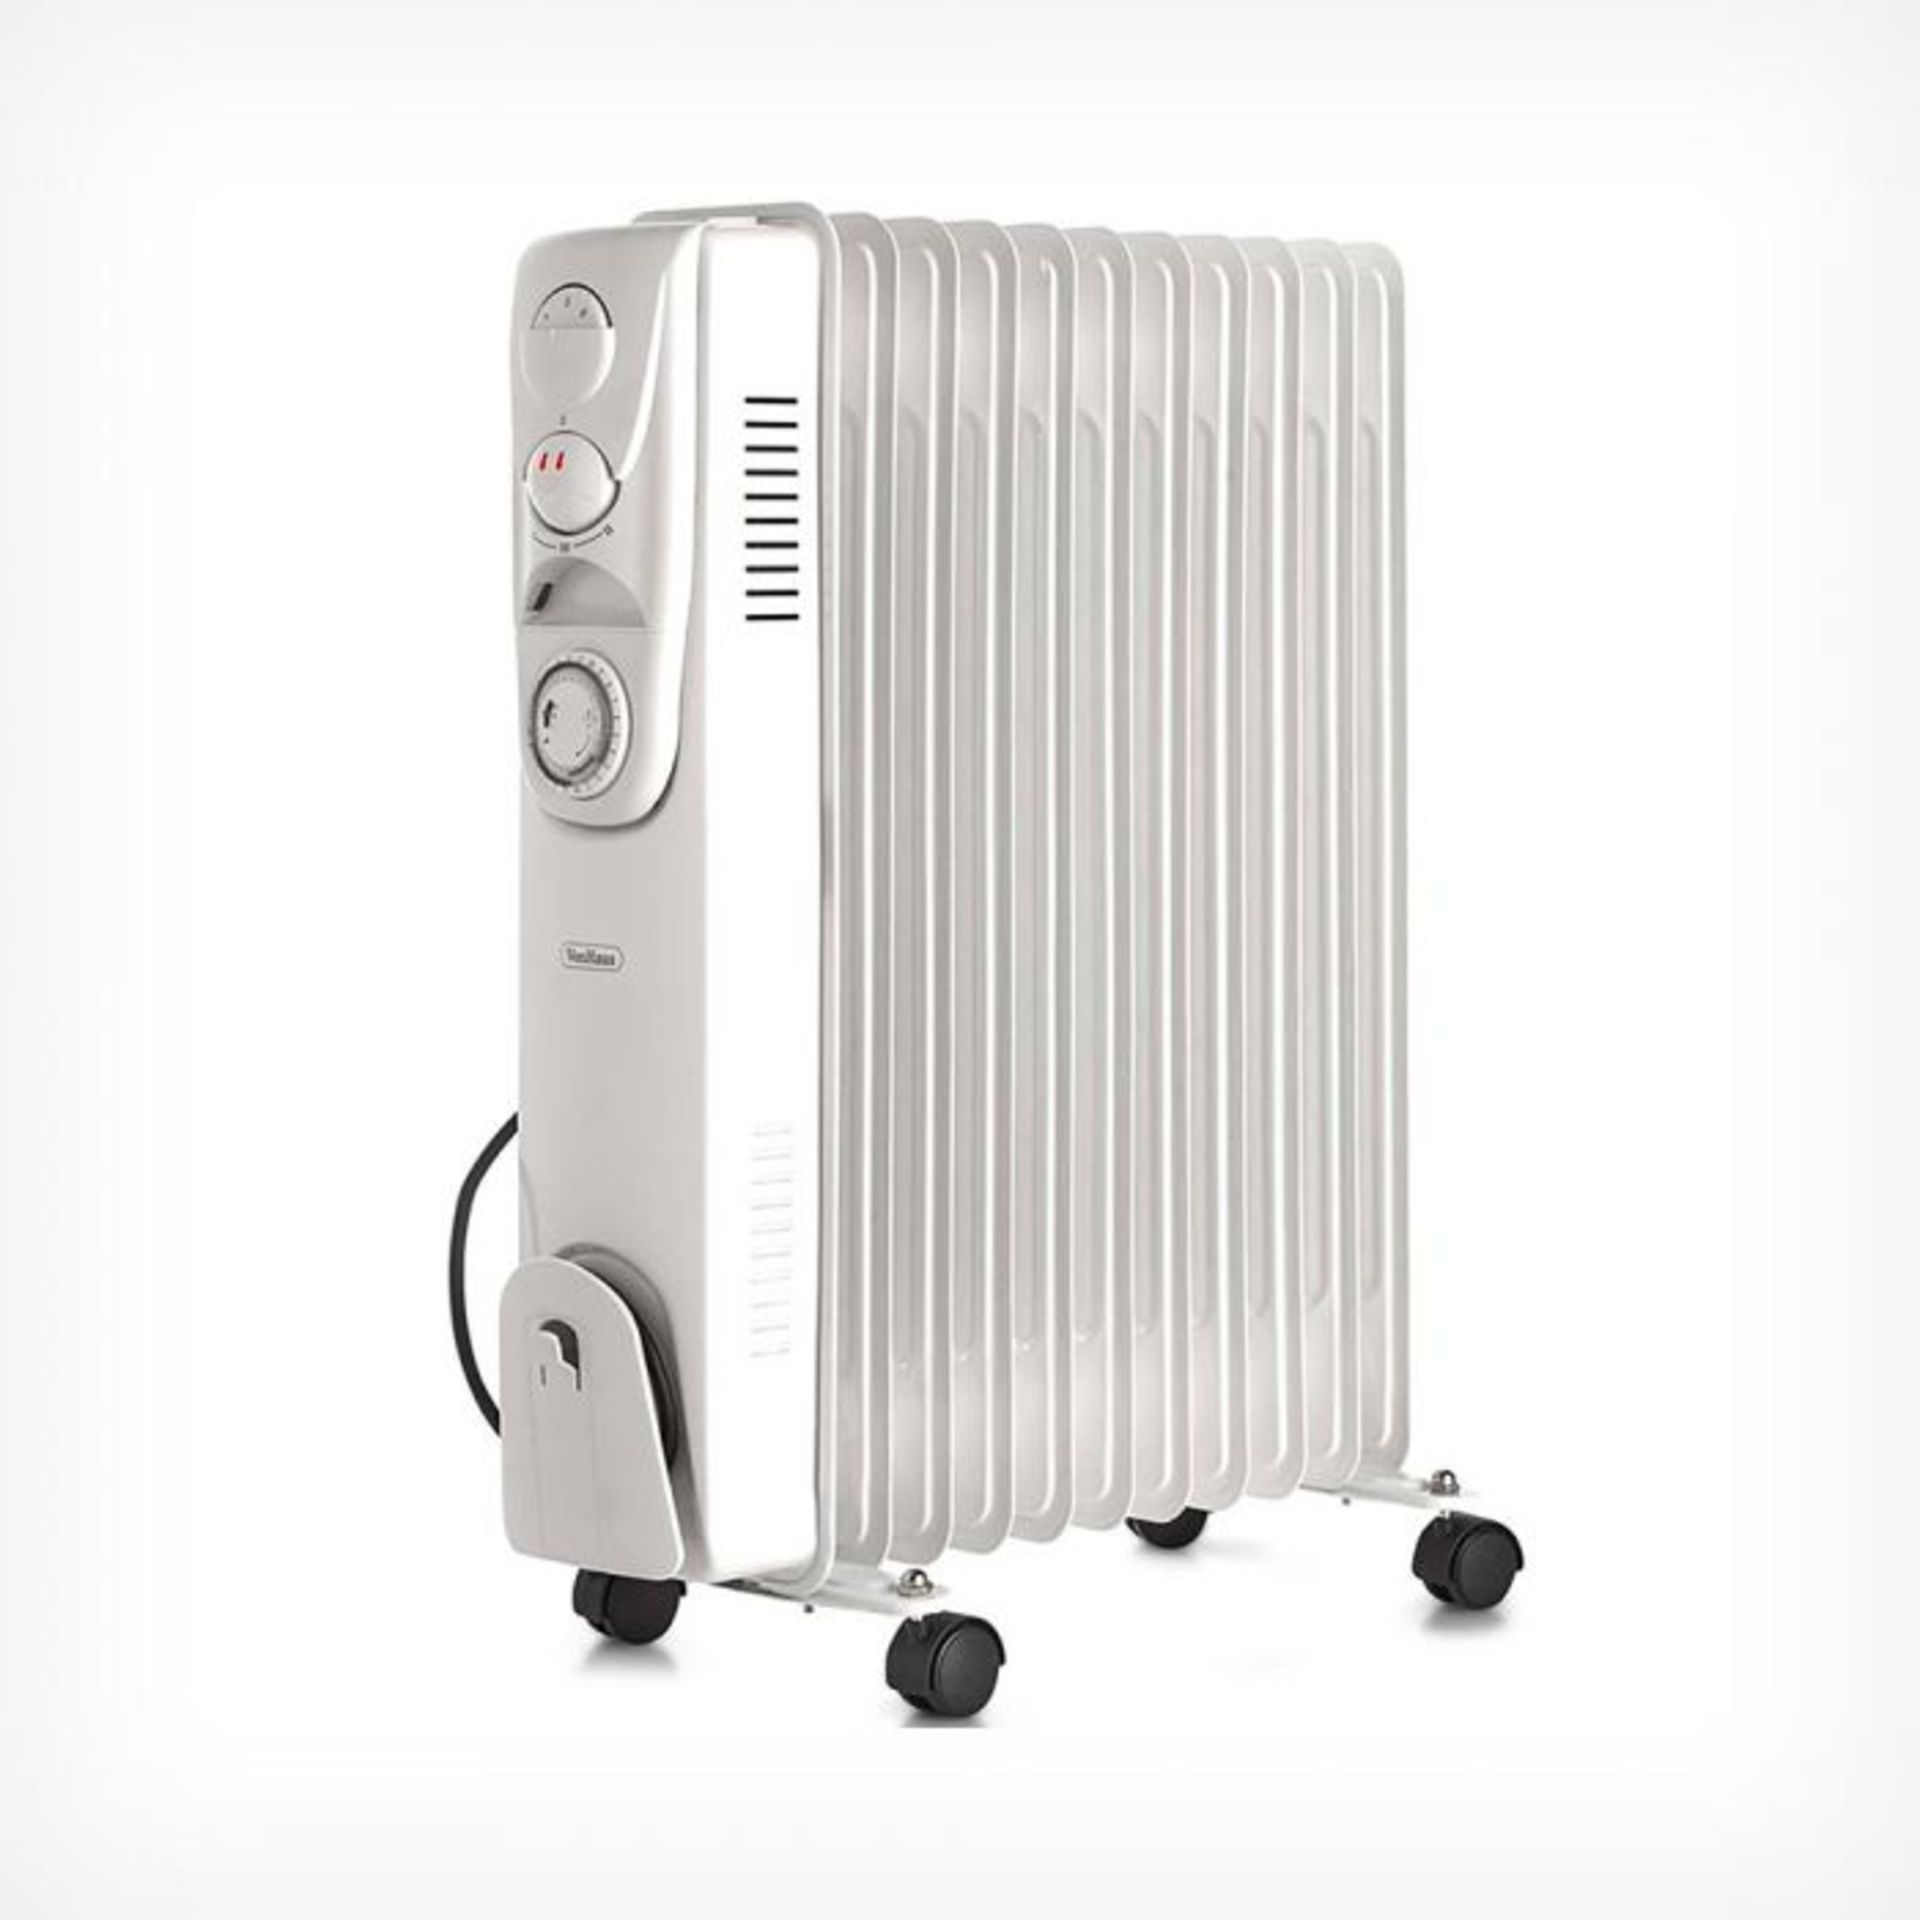 (V13) 11 Fin 2500W Oil Filled Radiator - White Suitable for areas up to 28 square metres 3 po... - Image 2 of 3